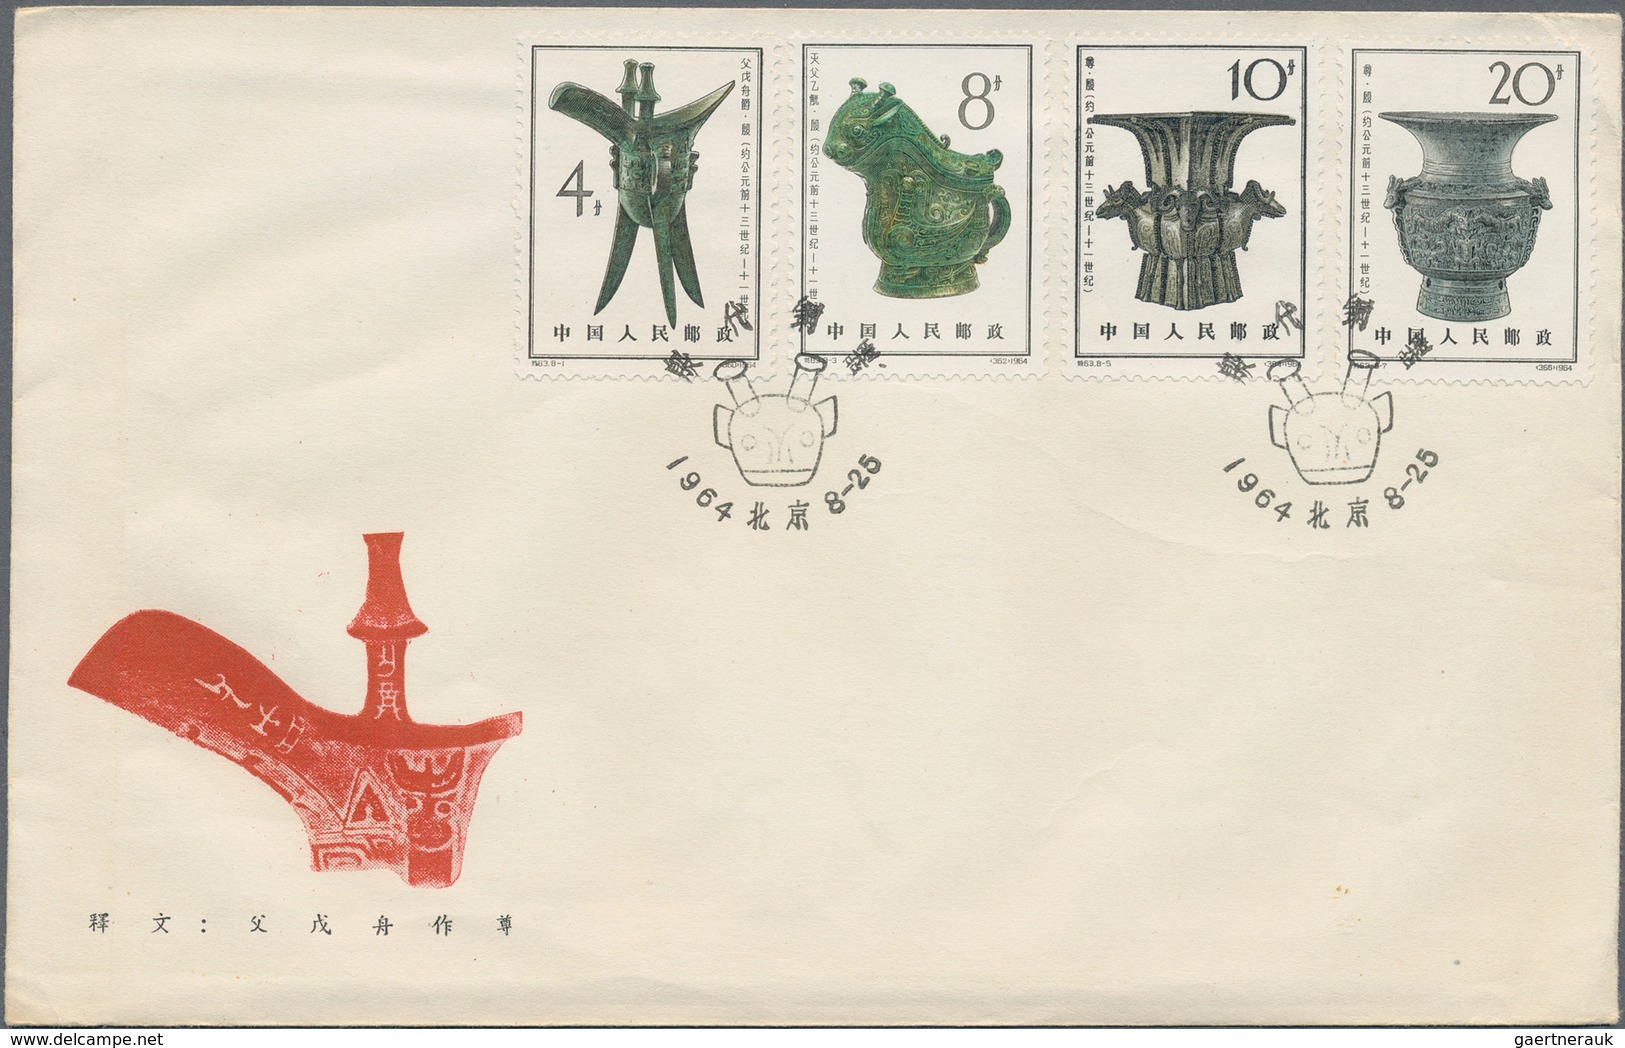 China - Volksrepublik: 1959/64, 4 FDC sets, of C66, C72, S39 and S63, unaddressed (Michel €505).